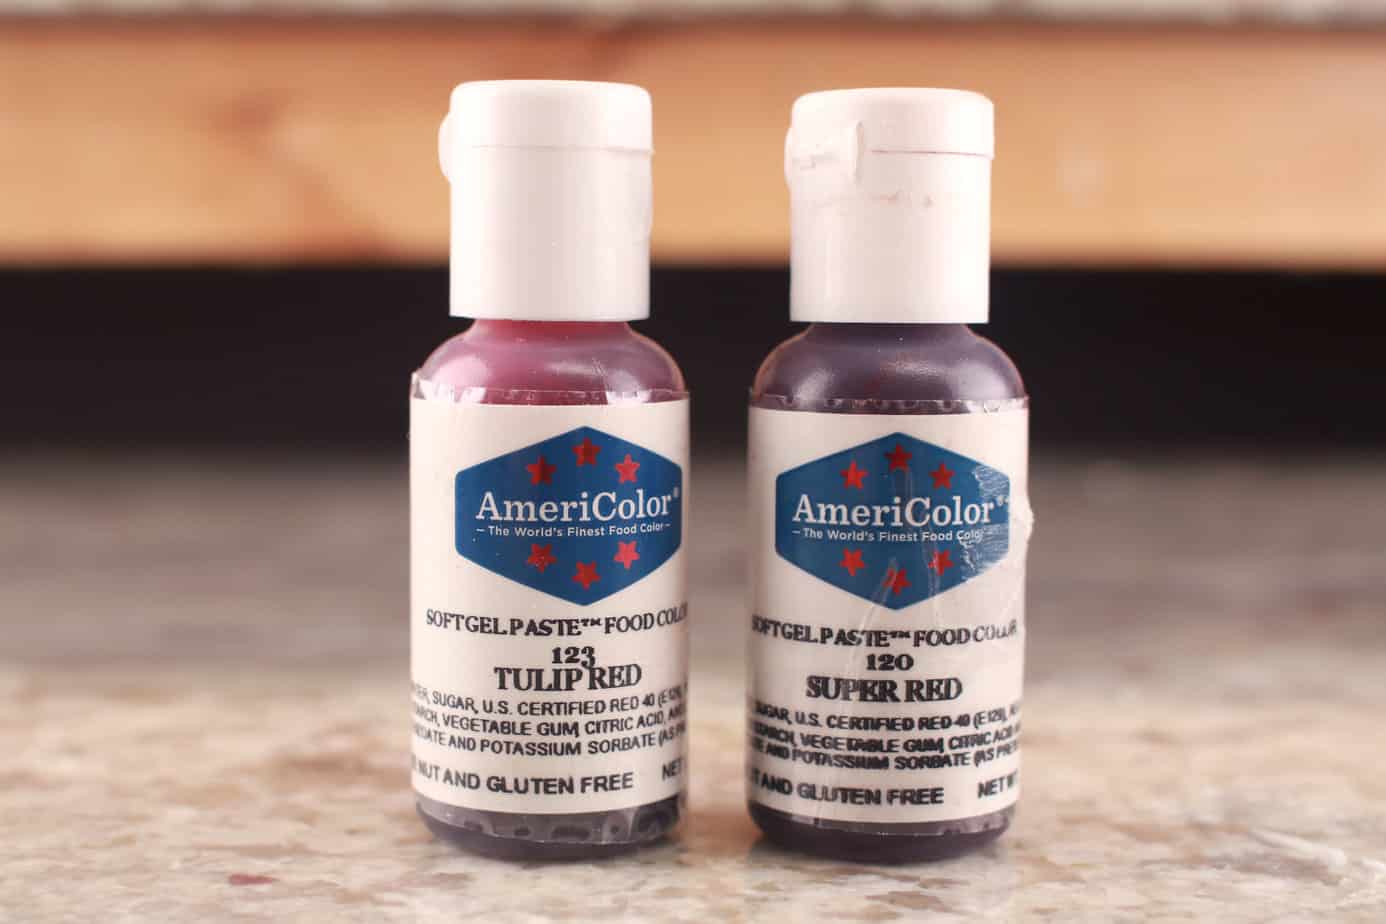 americolor tulip red and americolor super red gel colors. bottles on counter